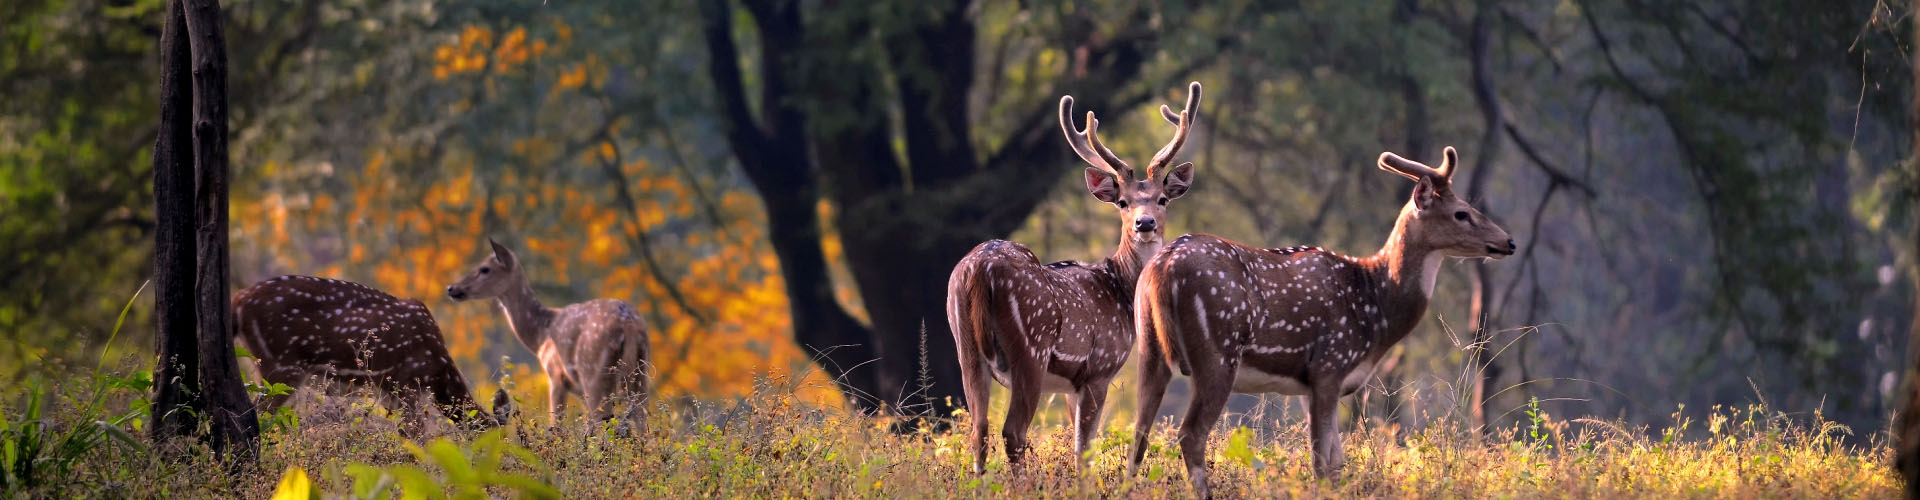 Kanha National Park Wildlife Tour & Holiday Packages